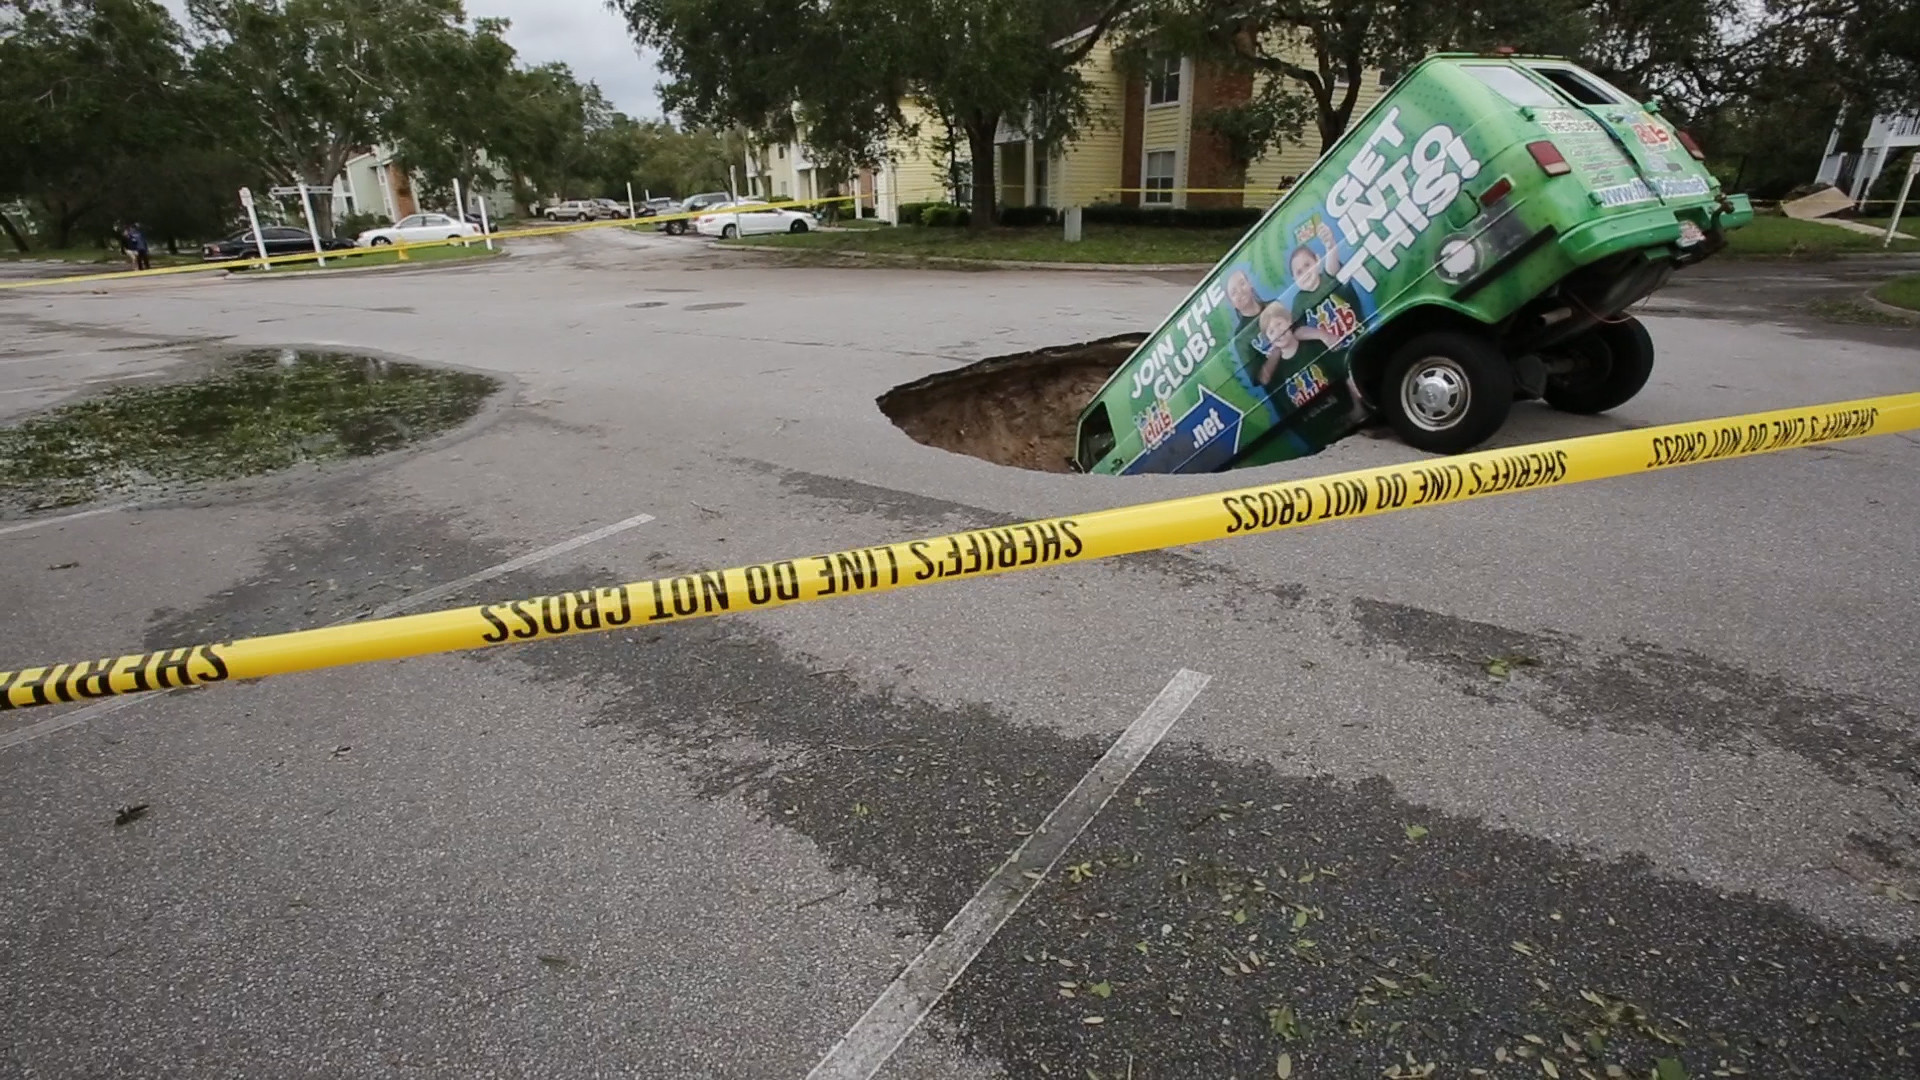 os-during-hurricane-irma-sinkhole-opened-at-astro-park-apartments-20170911.jpg